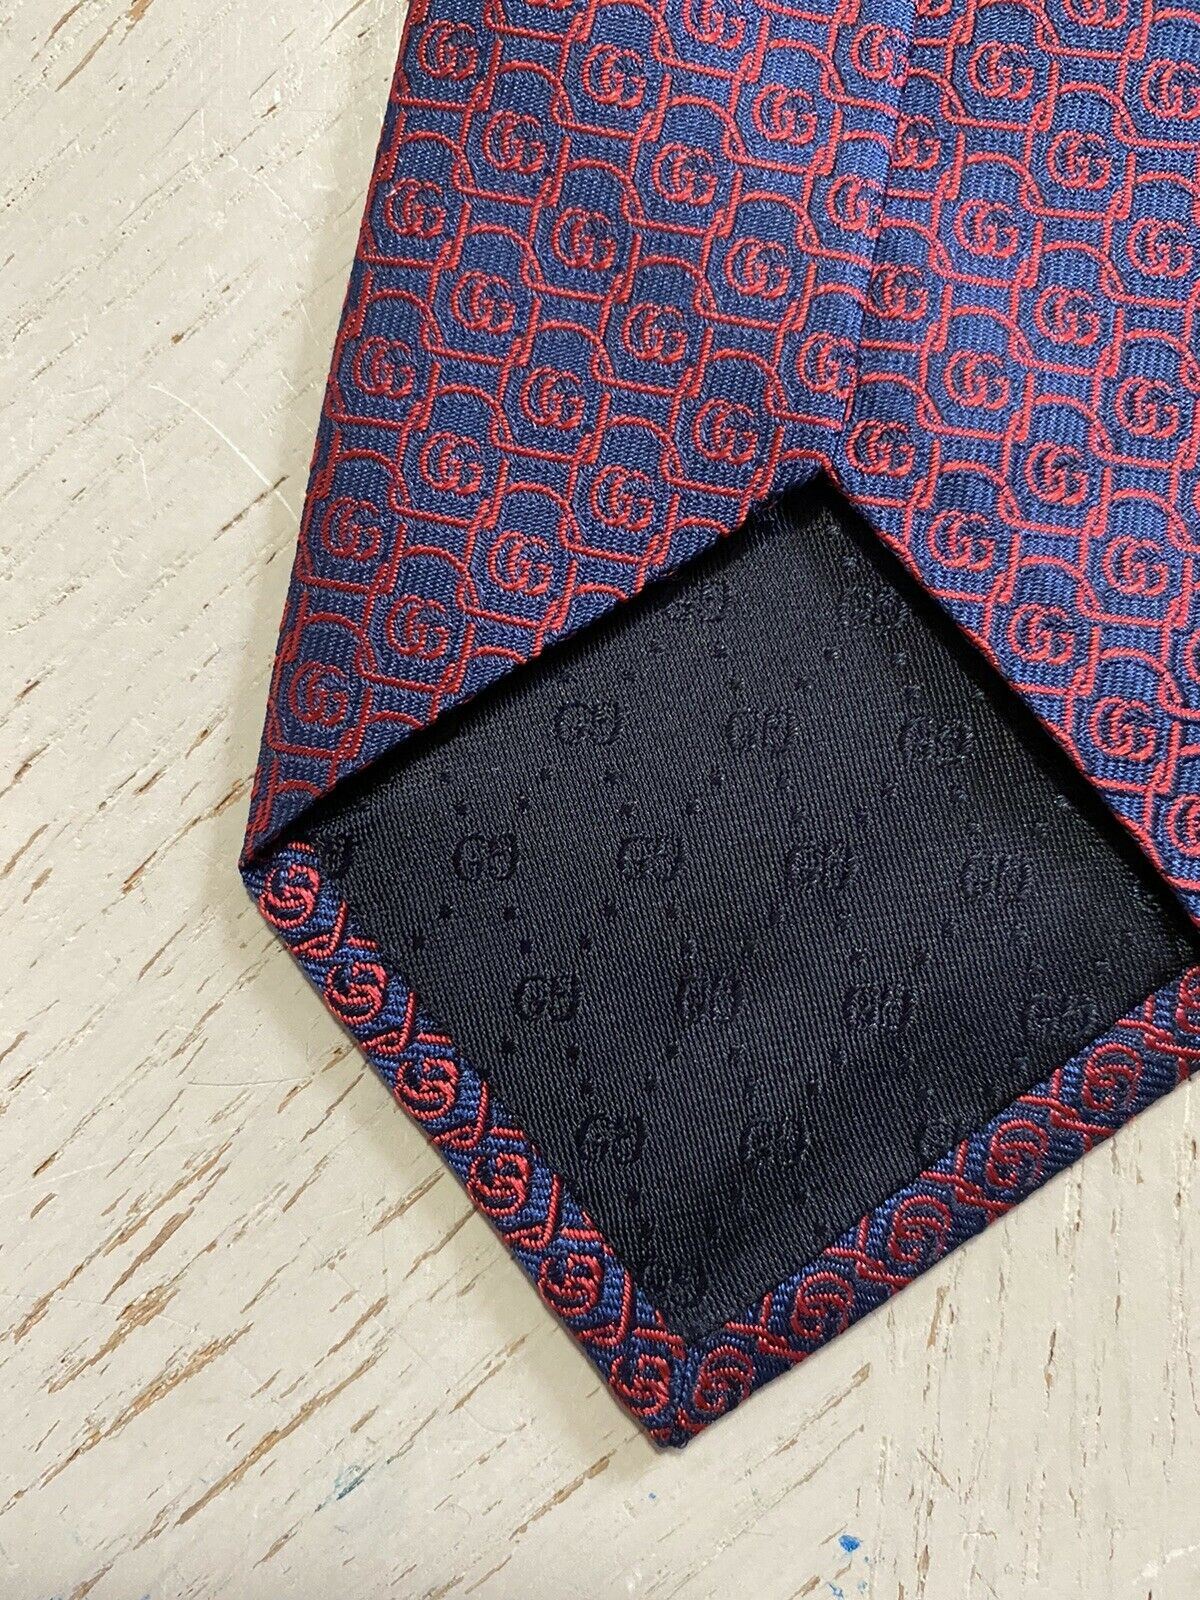 New  Gucci Mens GG Monogram Silk Neck Tie Red made in Italy